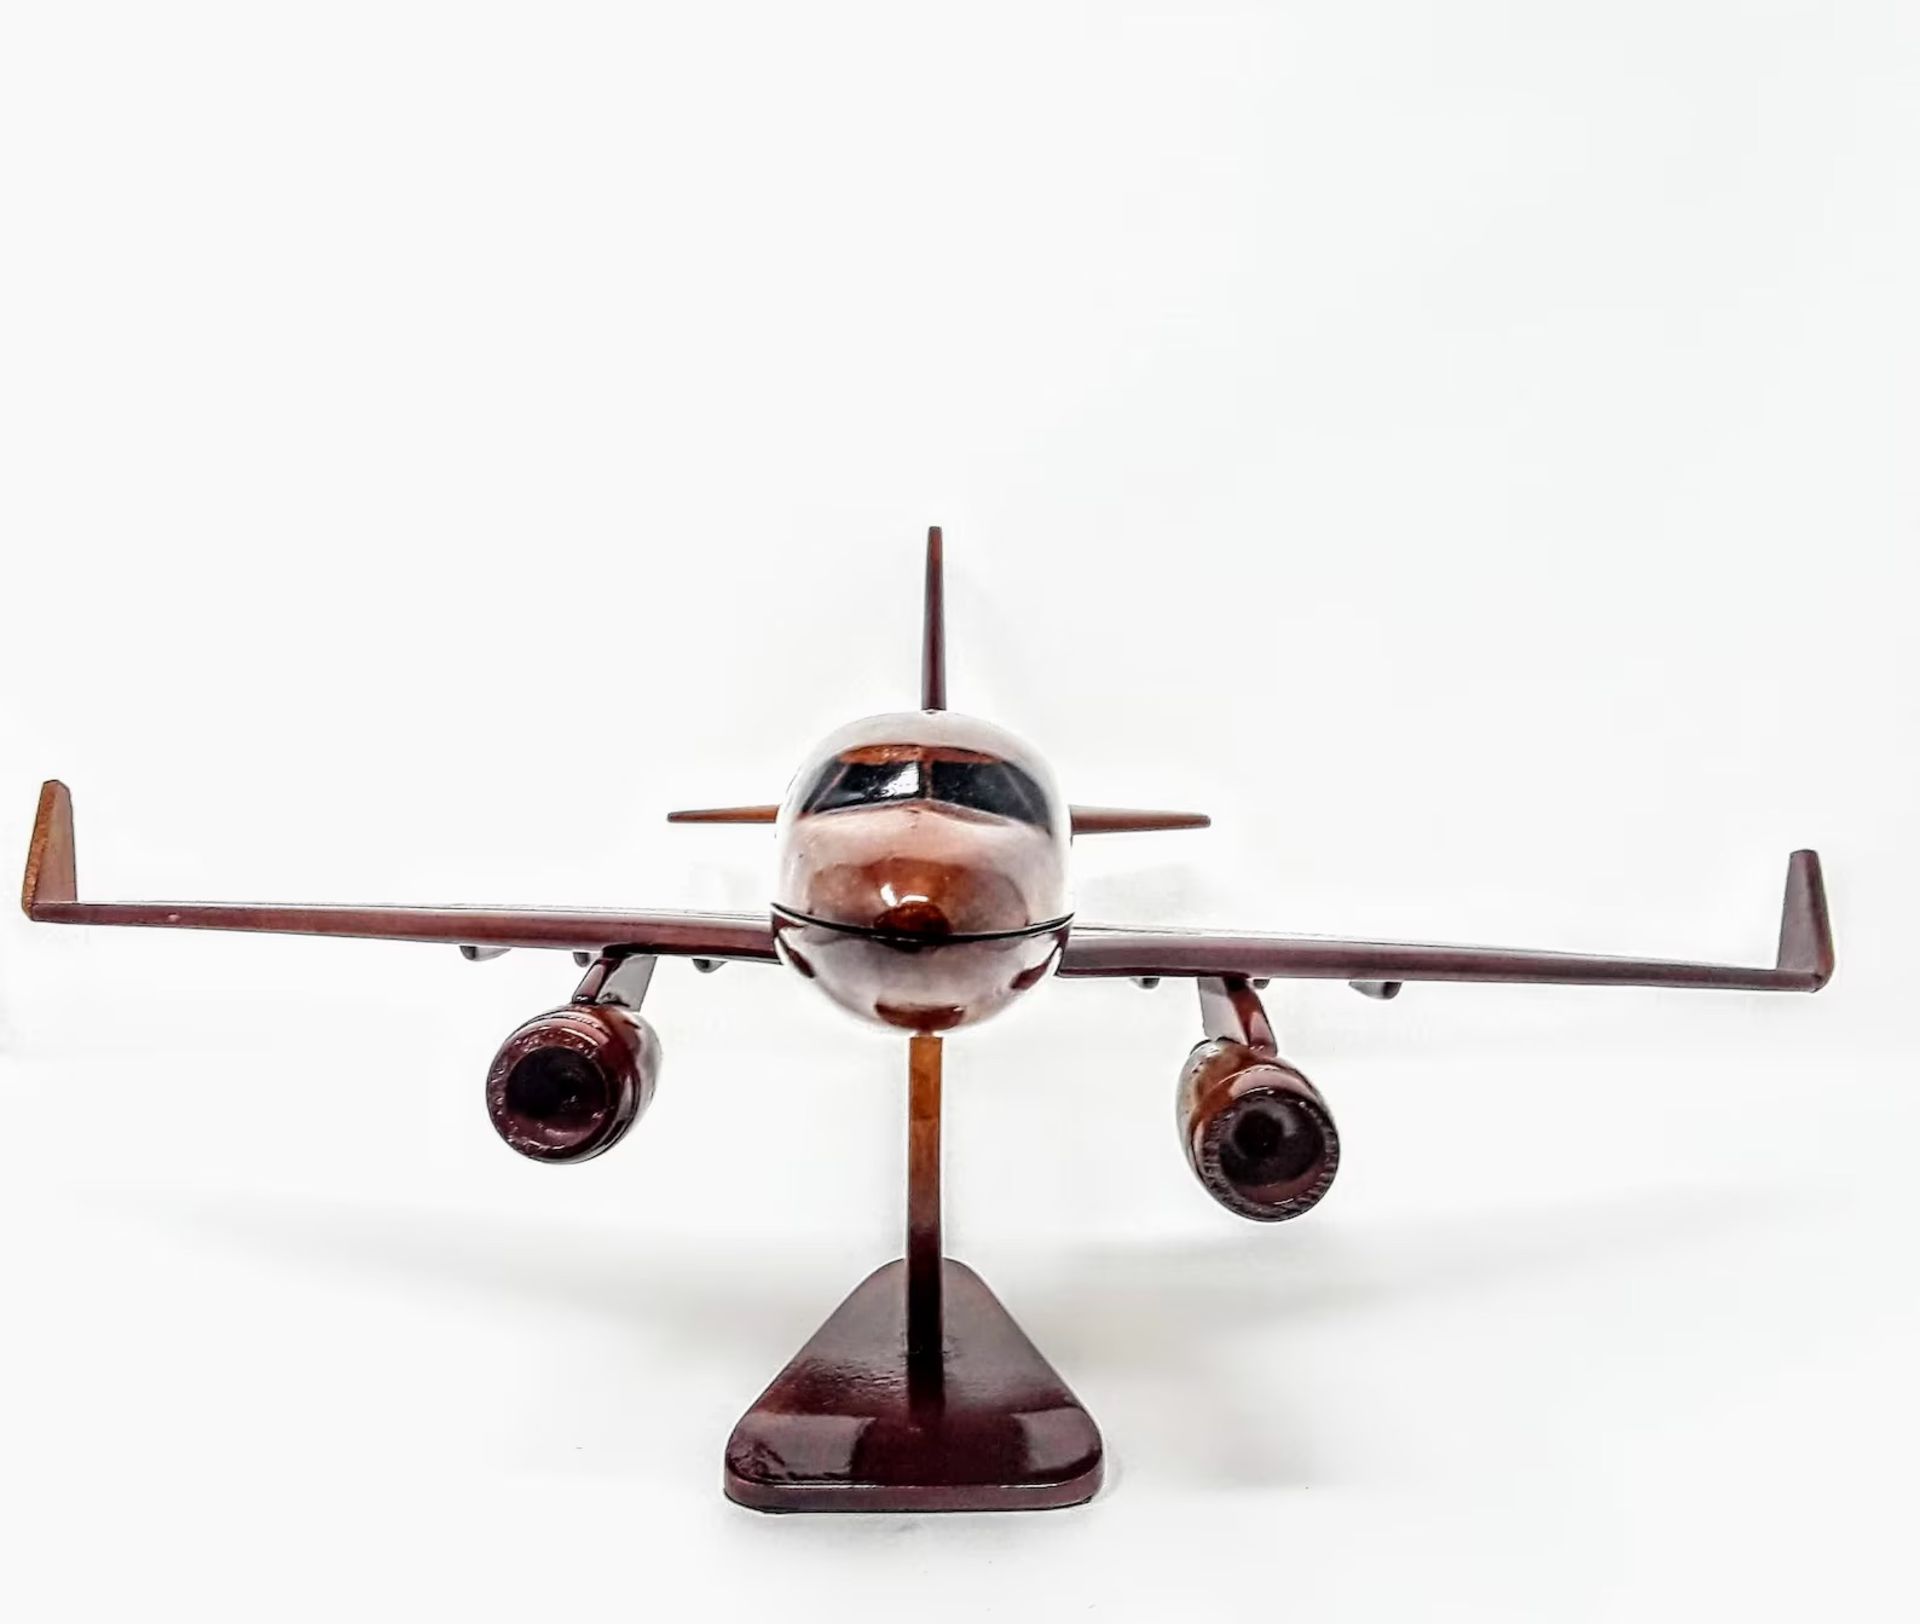 Boeing 737 Wooden Scale Desk Display - Image 3 of 4